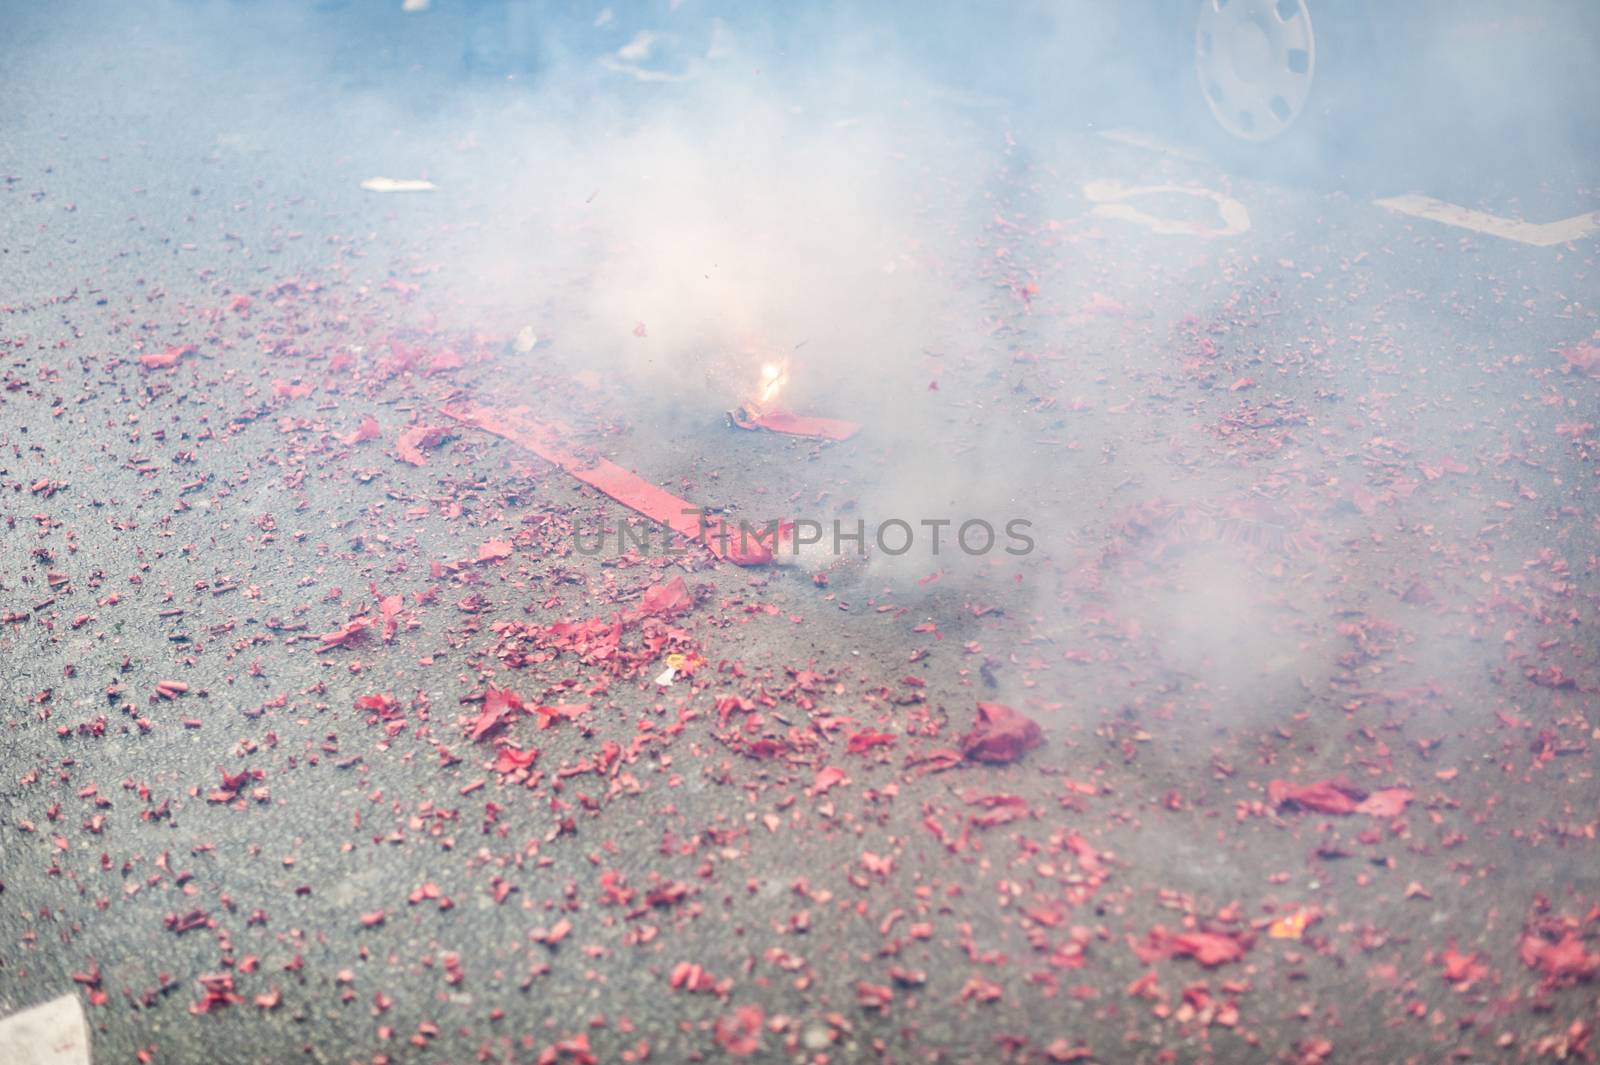 firecrackers exploding in the street for the chinese new year by LP2Studio